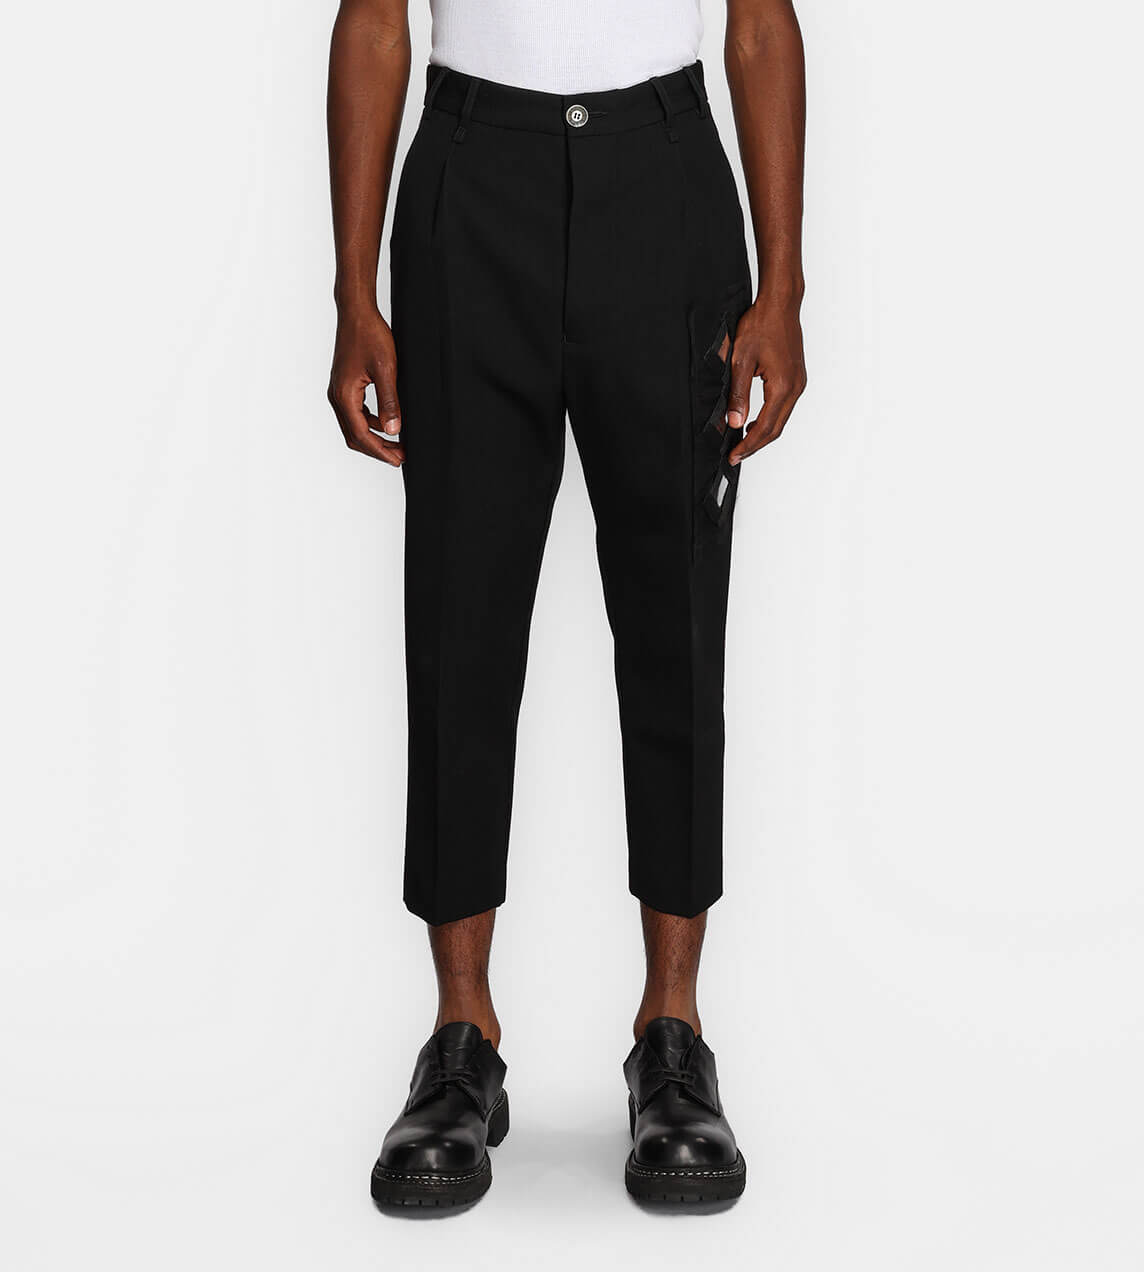 Buy online Black Solid Straight Tapered Pant from Skirts, tapered